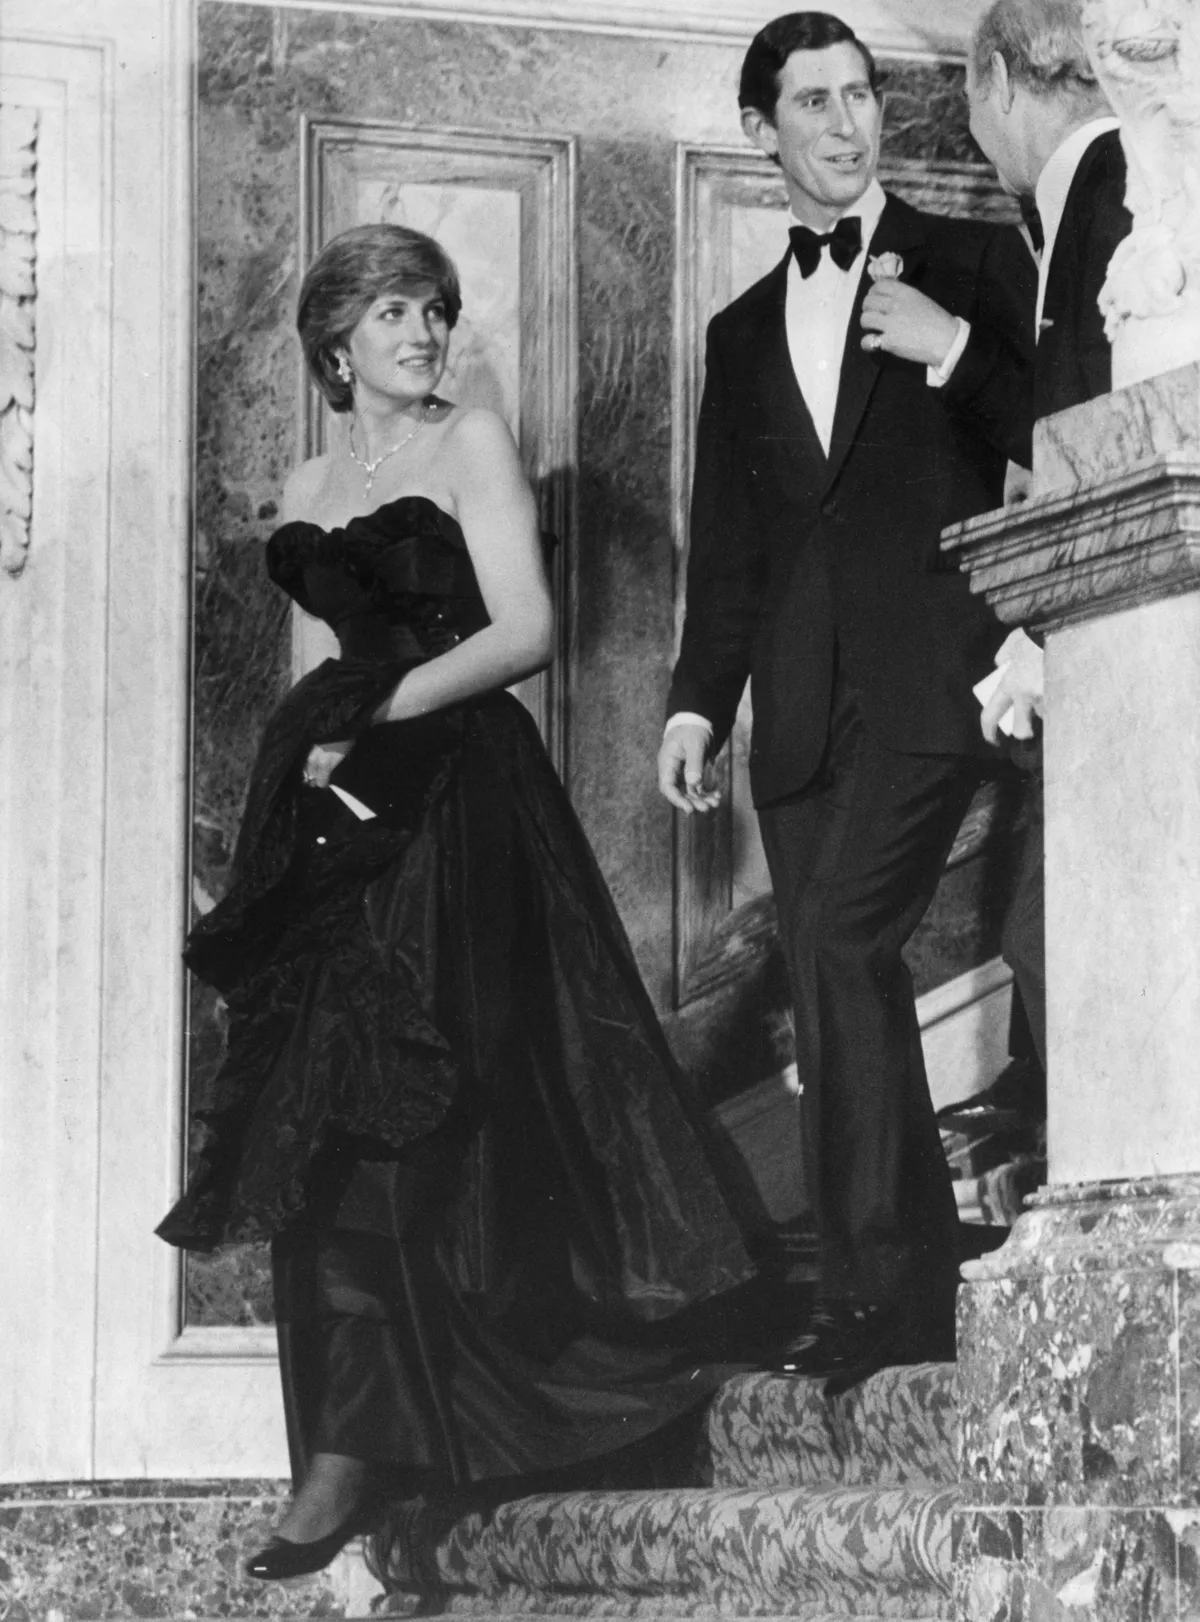 le prince Charles et Lady Diana Spencer (1961-1997). | Photo : Getty Images